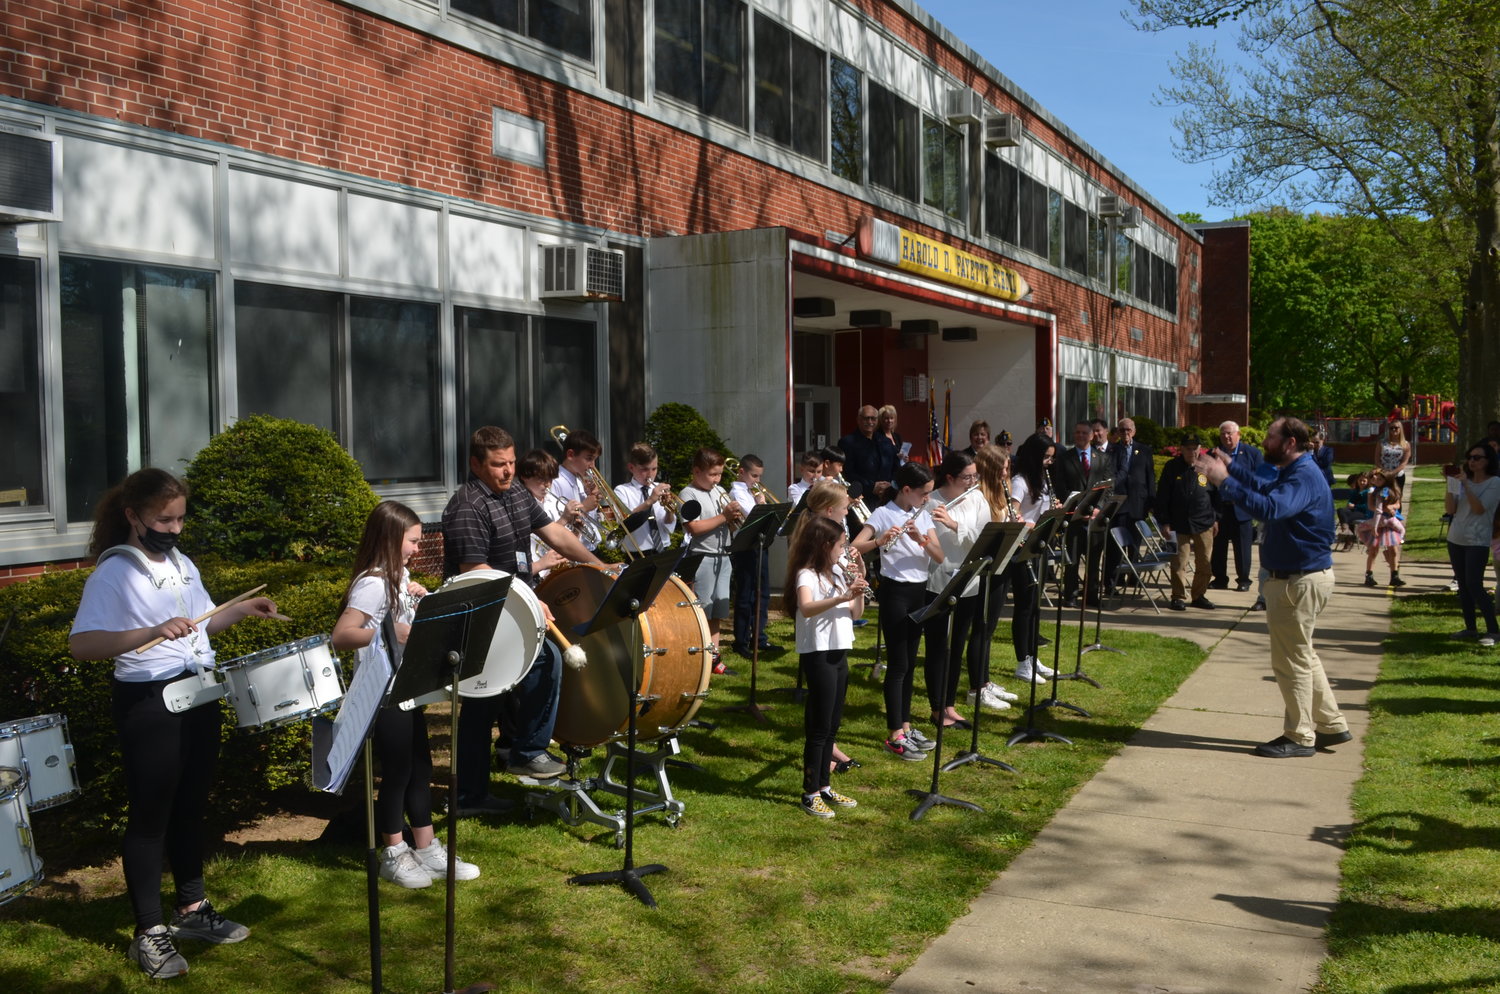 Harold D. Fayette School’s band played “Marching Marines” during the ceremony.